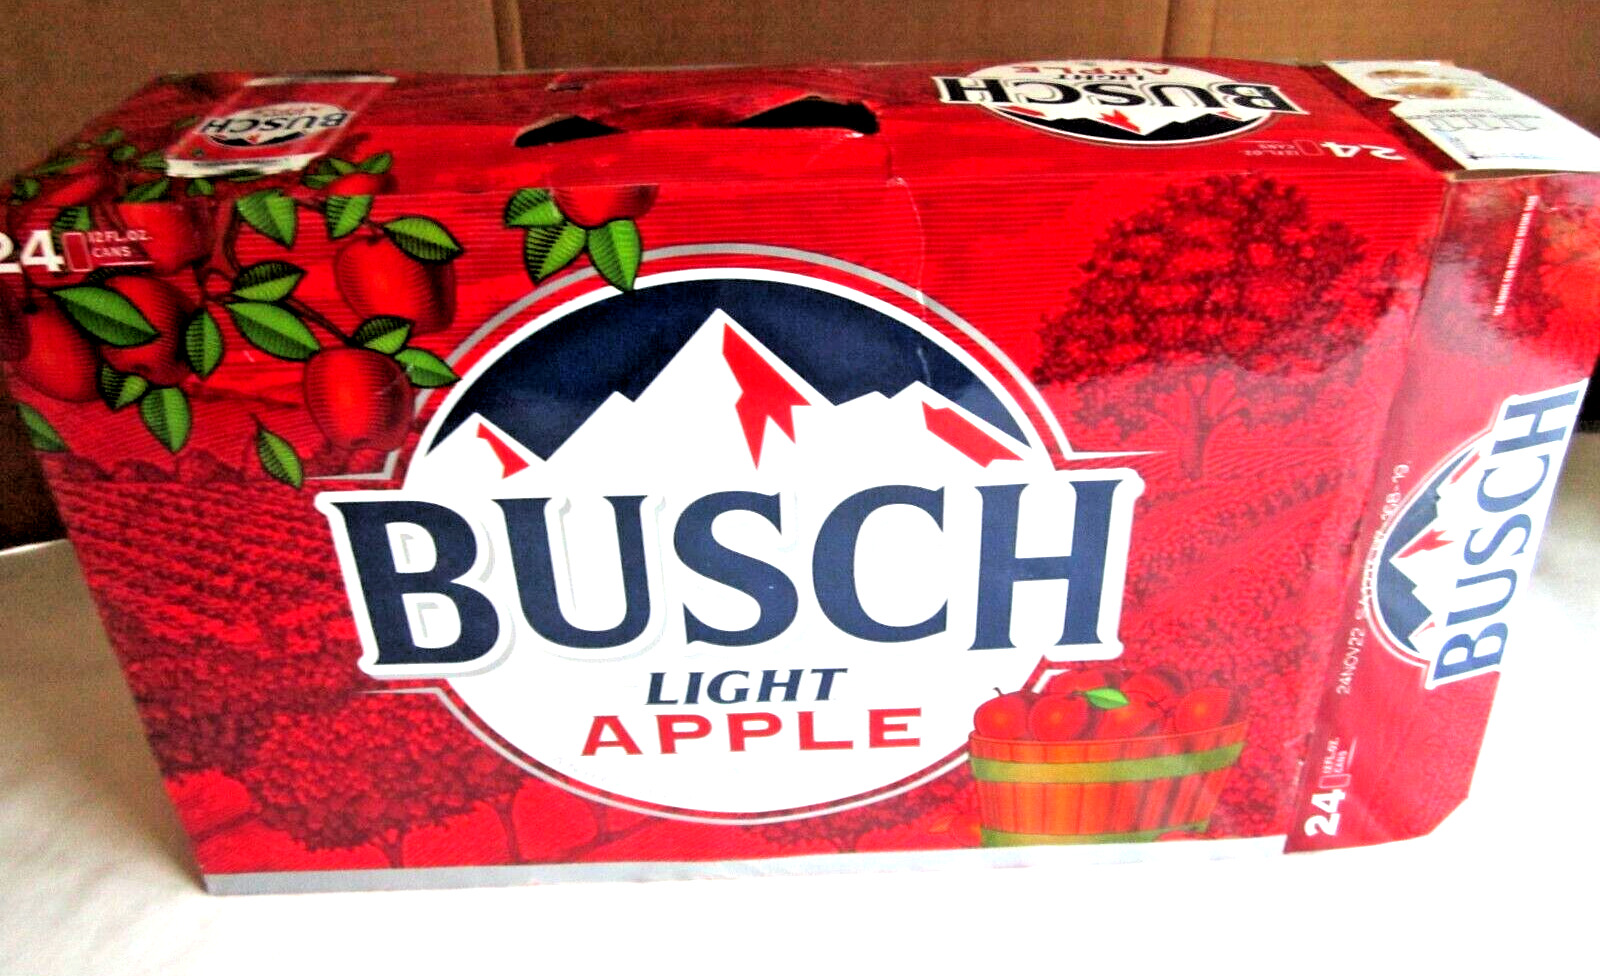 Busch Light Apple BEER Empty 24 Pack Box Limited Edition Case Display Nov 2022